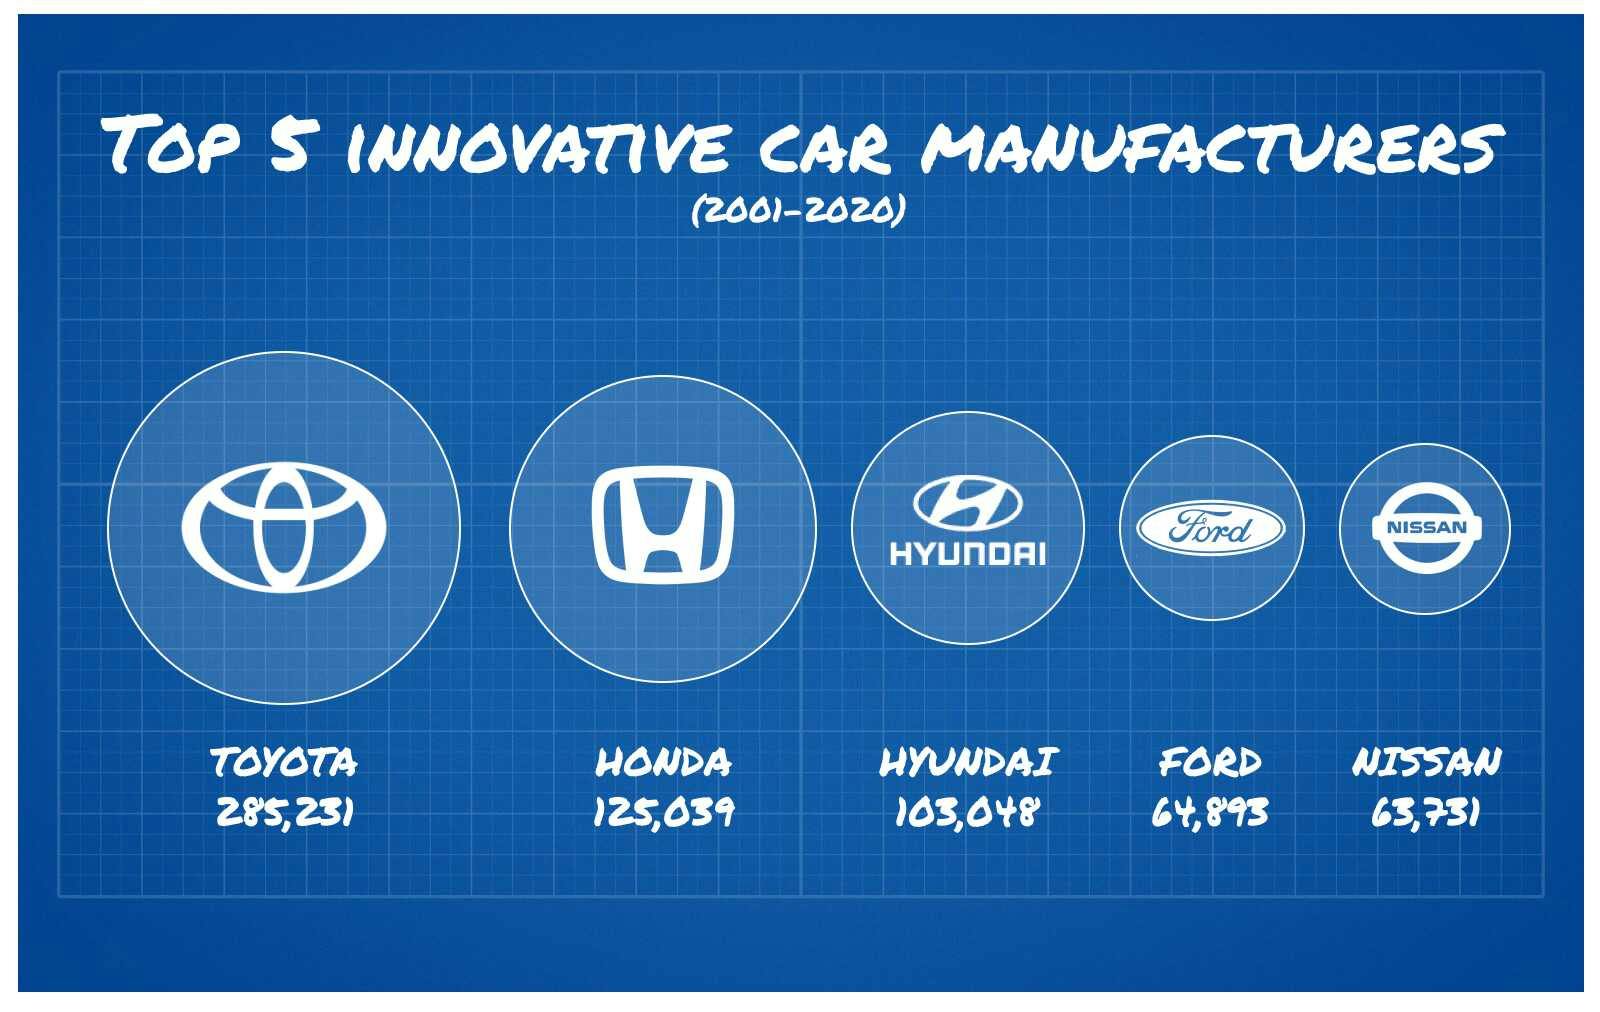 The Most Innovative Car Manufacturers of the last 20 years Lease Fetcher